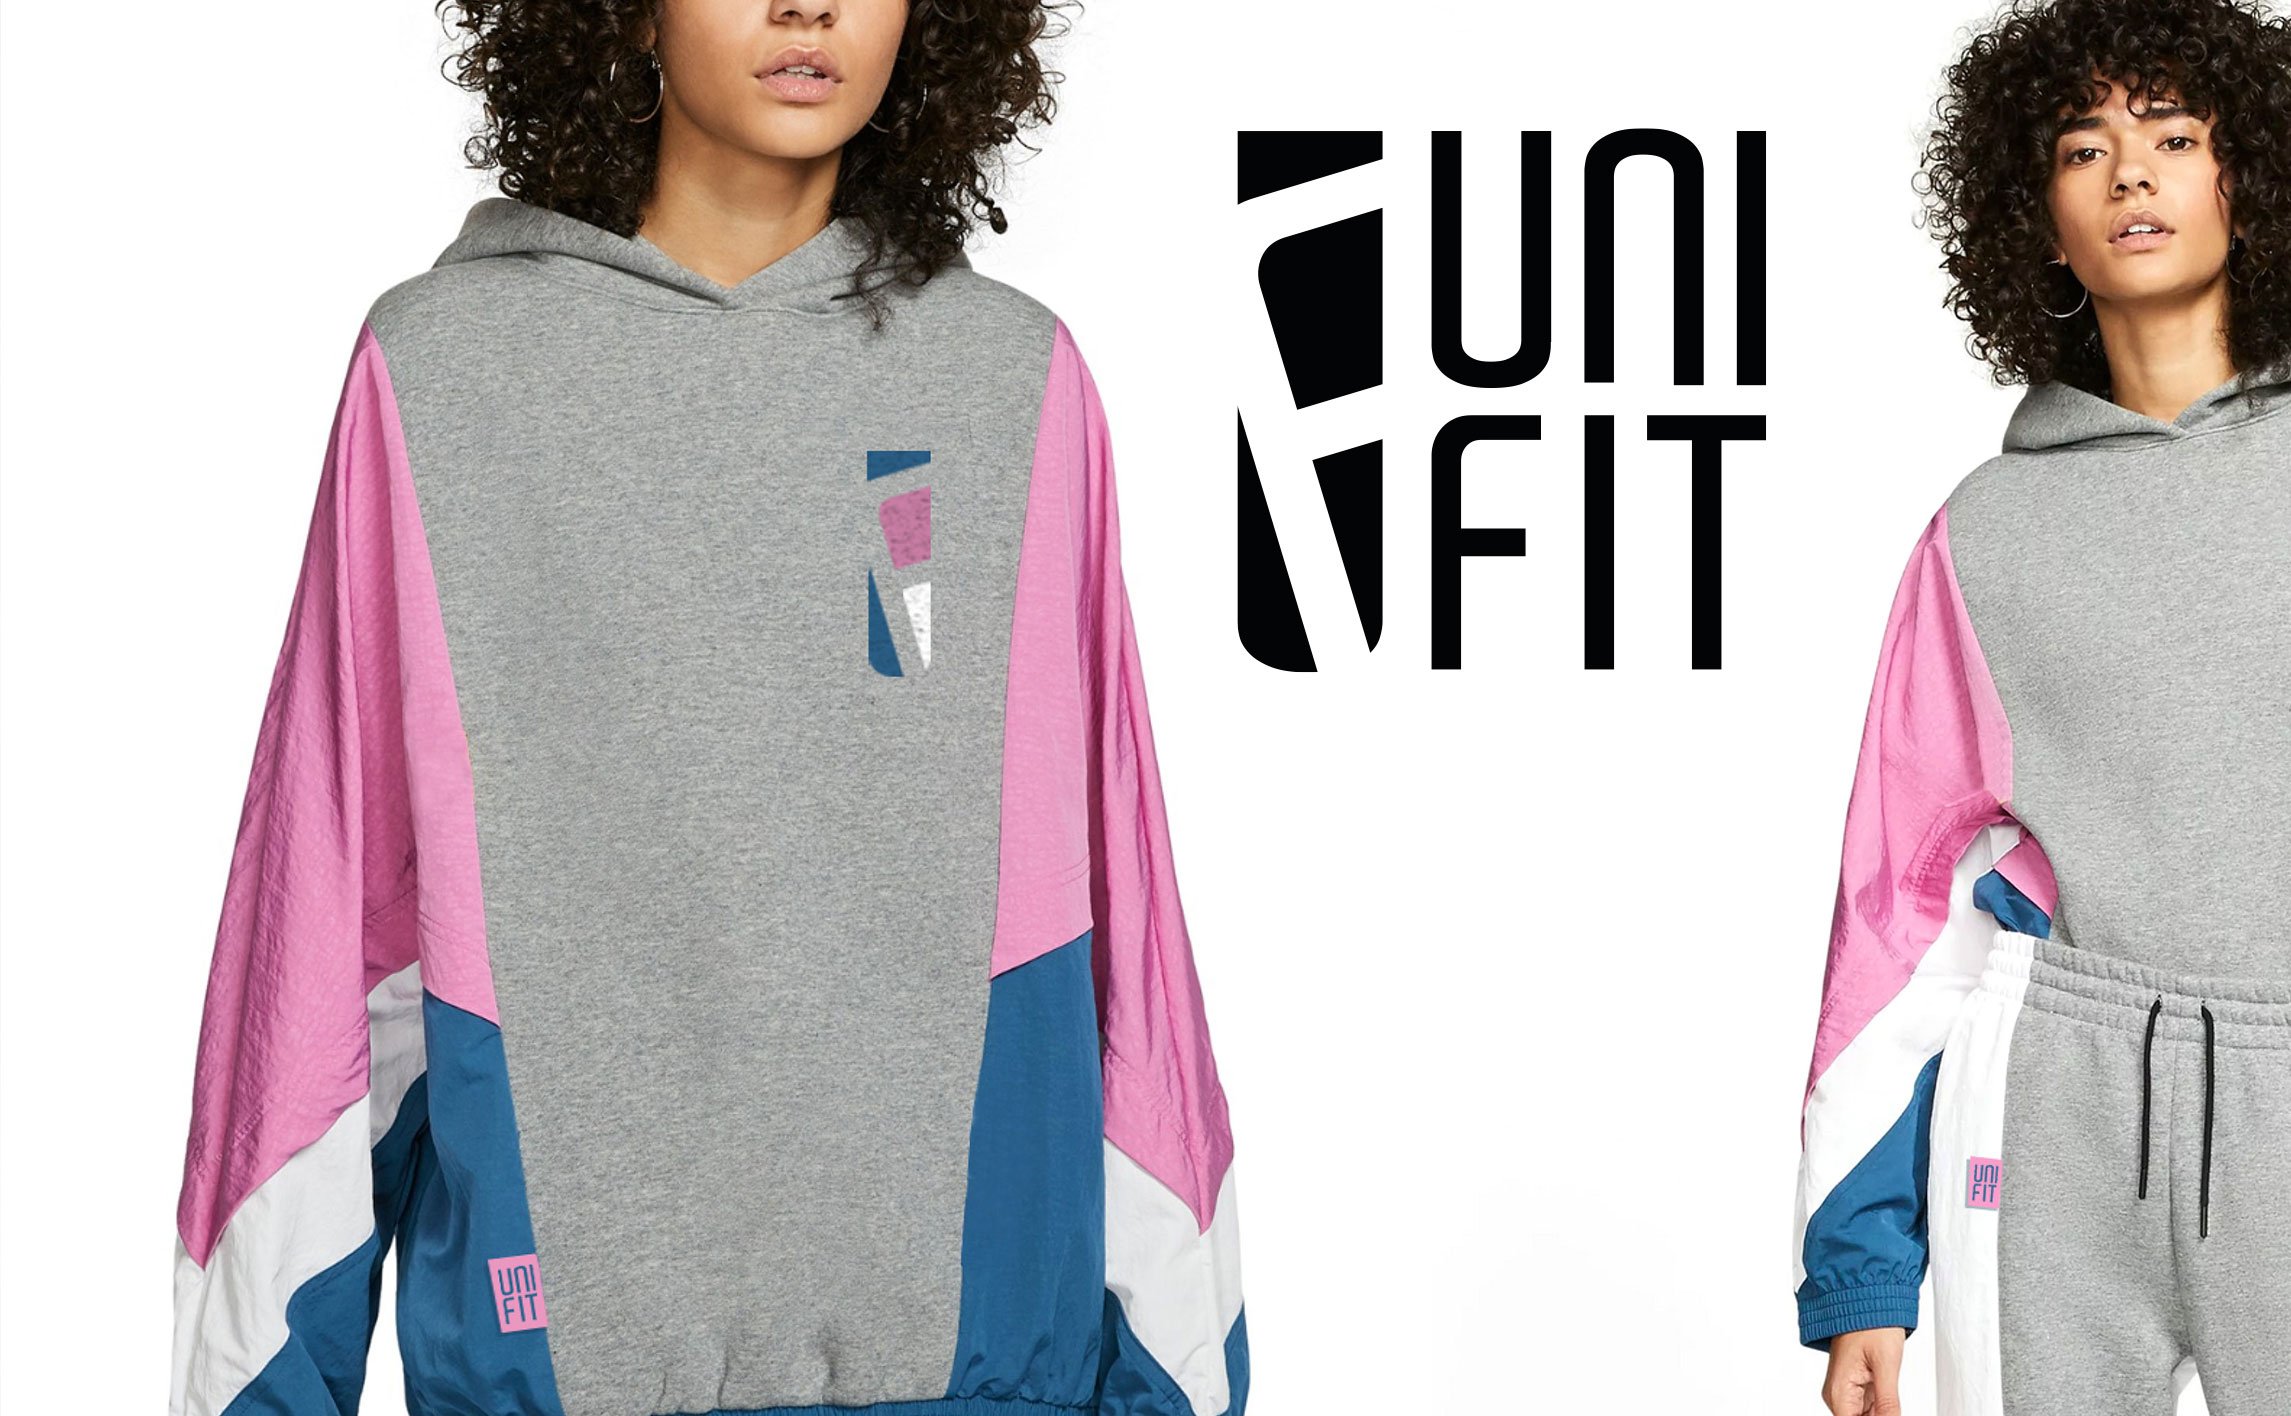 UNIFIT&lt;strong&gtCOMING SOON&lt;/strong&gt;